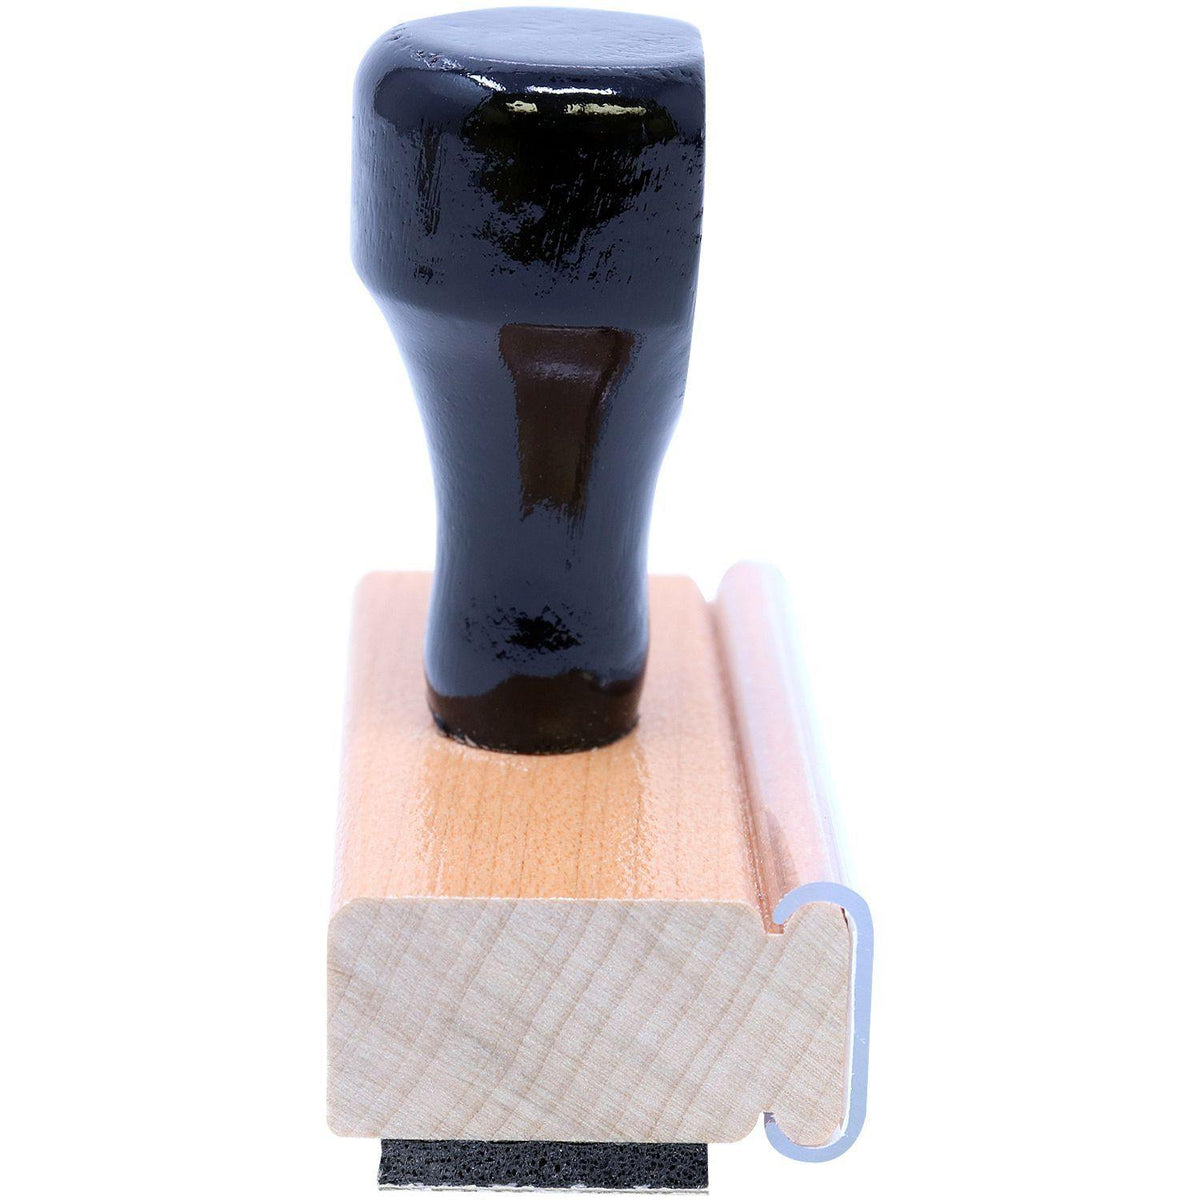 Please Correct Rubber Stamp - Engineer Seal Stamps - Brand_Acorn, Impression Size_Small, Stamp Type_Regular Stamp, Type of Use_Teacher